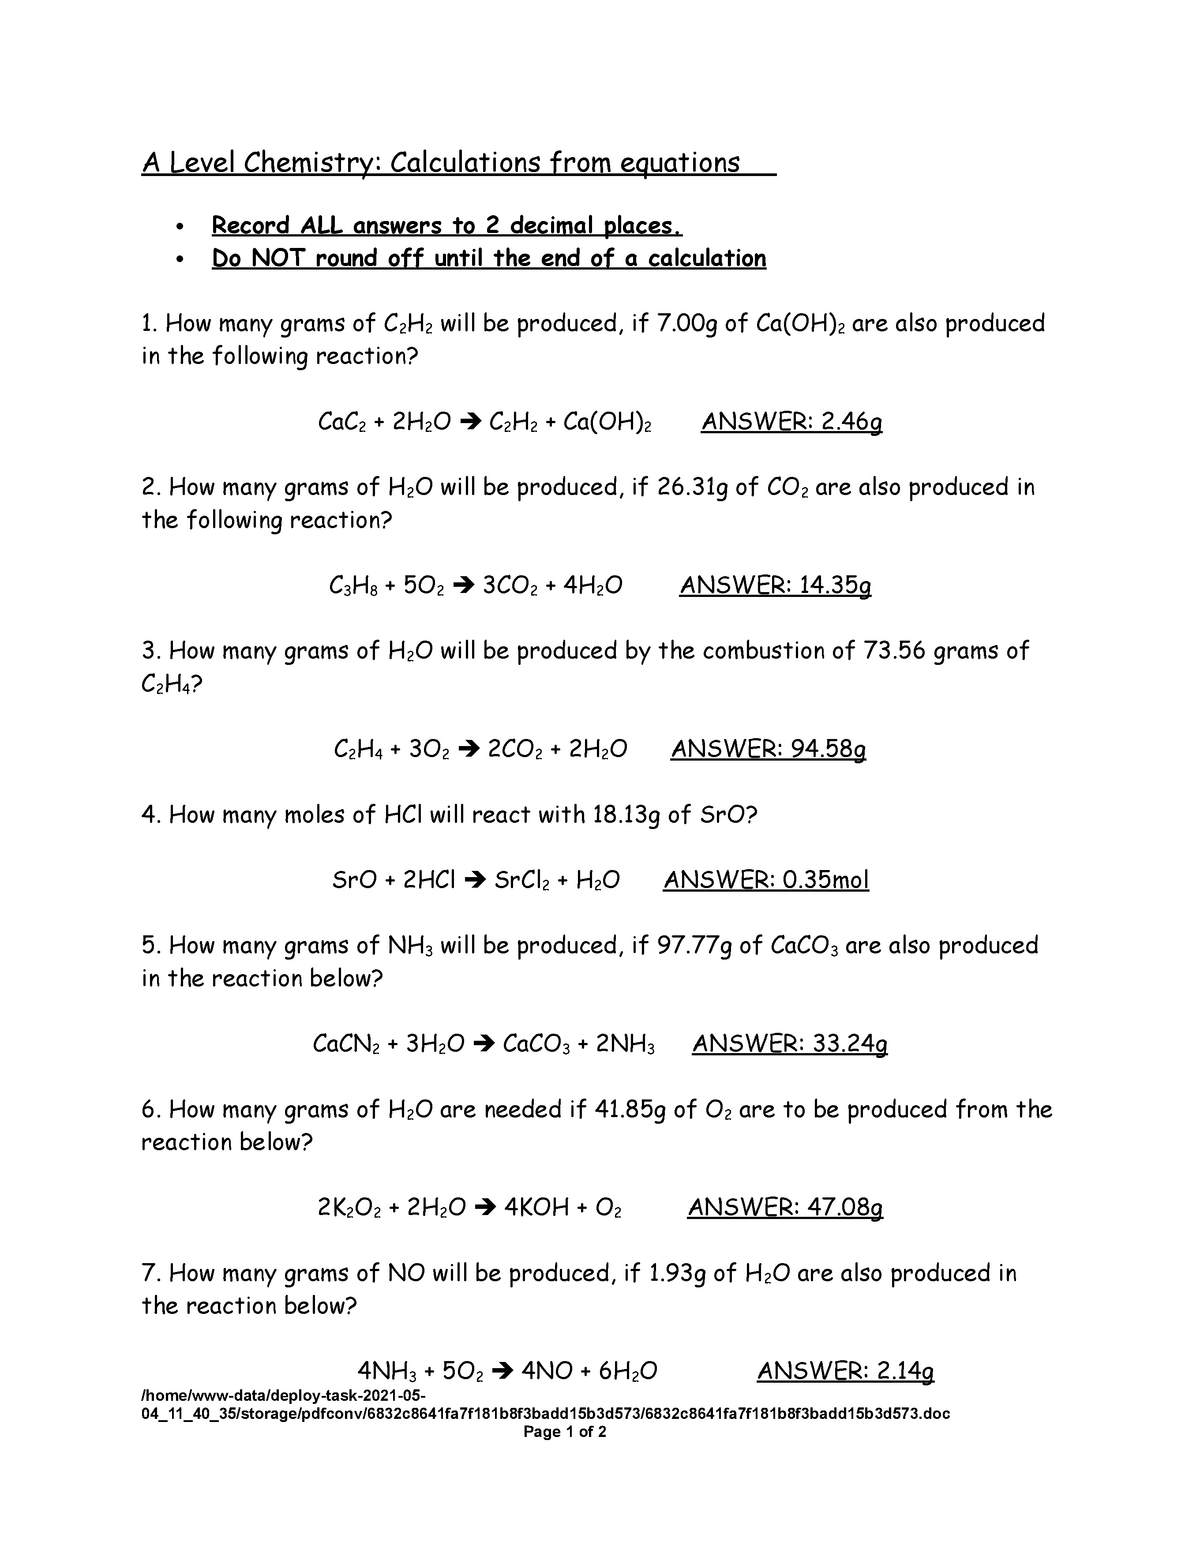 mole-calculations-02-answers-a-level-chemistry-calculations-from-equations-record-all